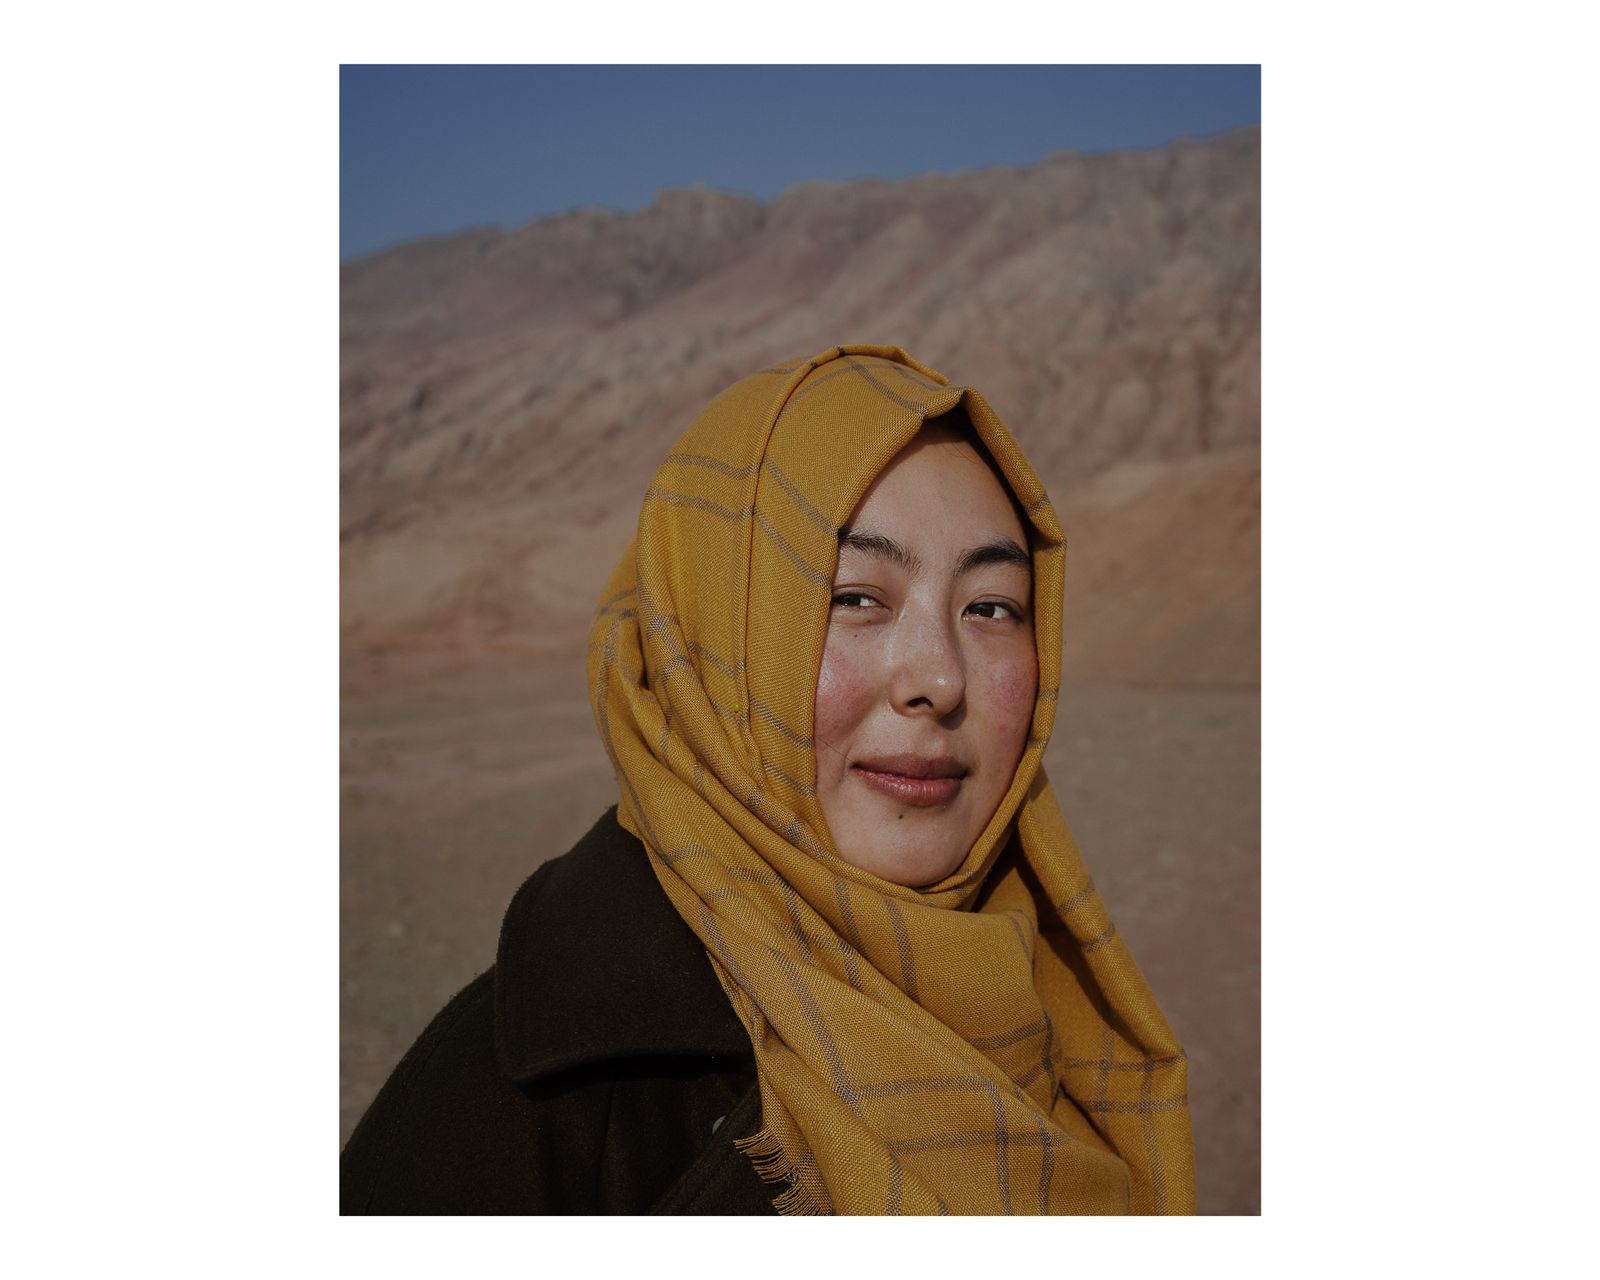 © Davide Monteleone - Image from the A NEW SILK ROAD photography project